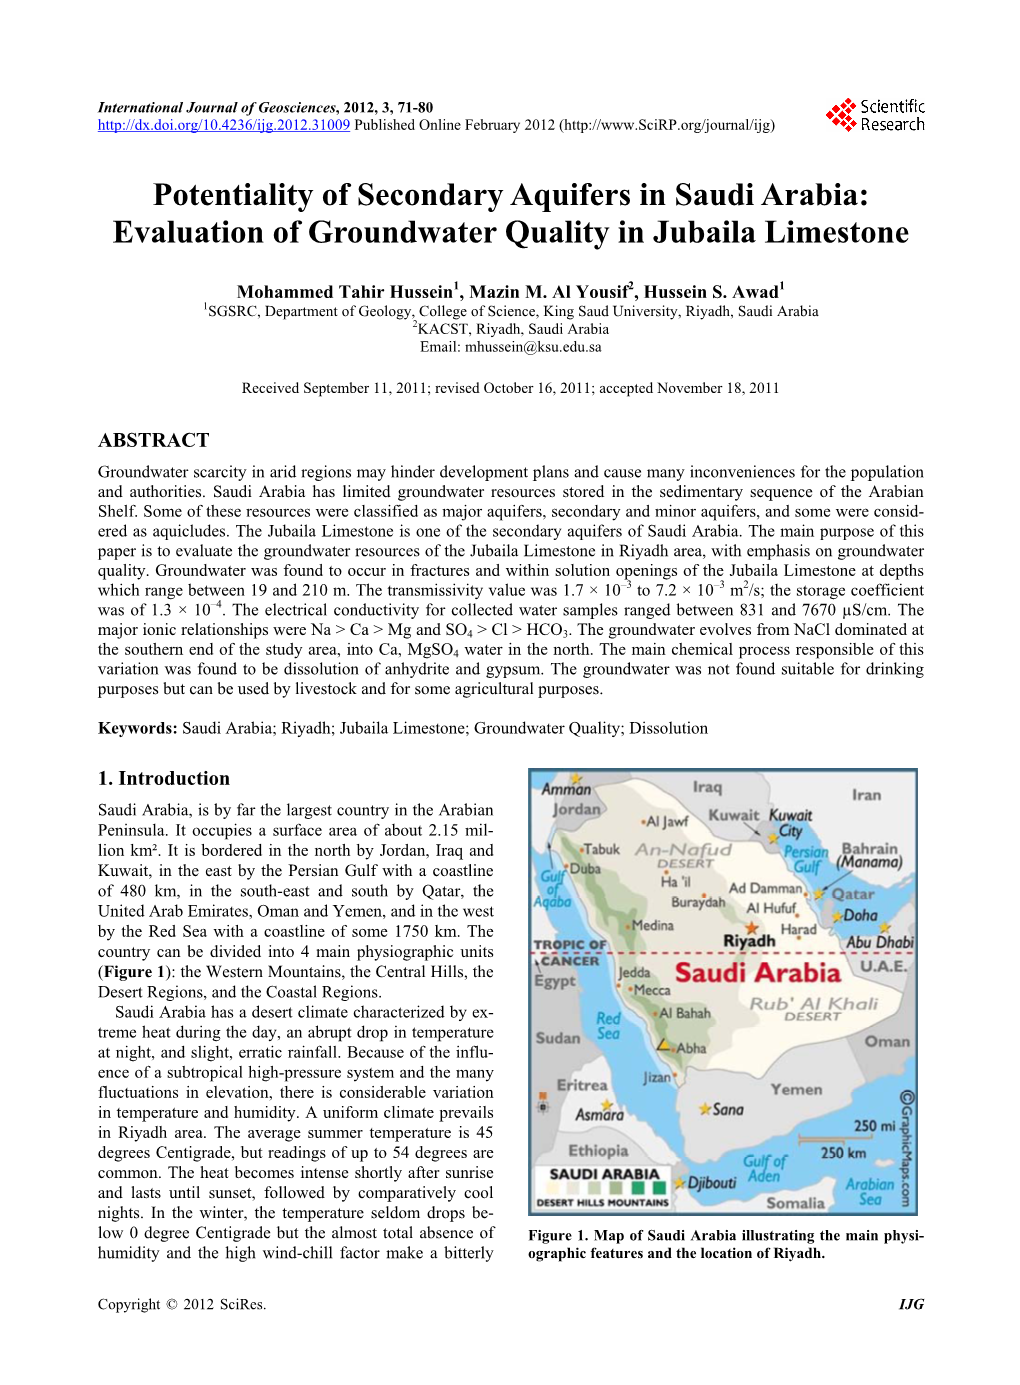 Potentiality of Secondary Aquifers in Saudi Arabia: Evaluation of Groundwater Quality in Jubaila Limestone